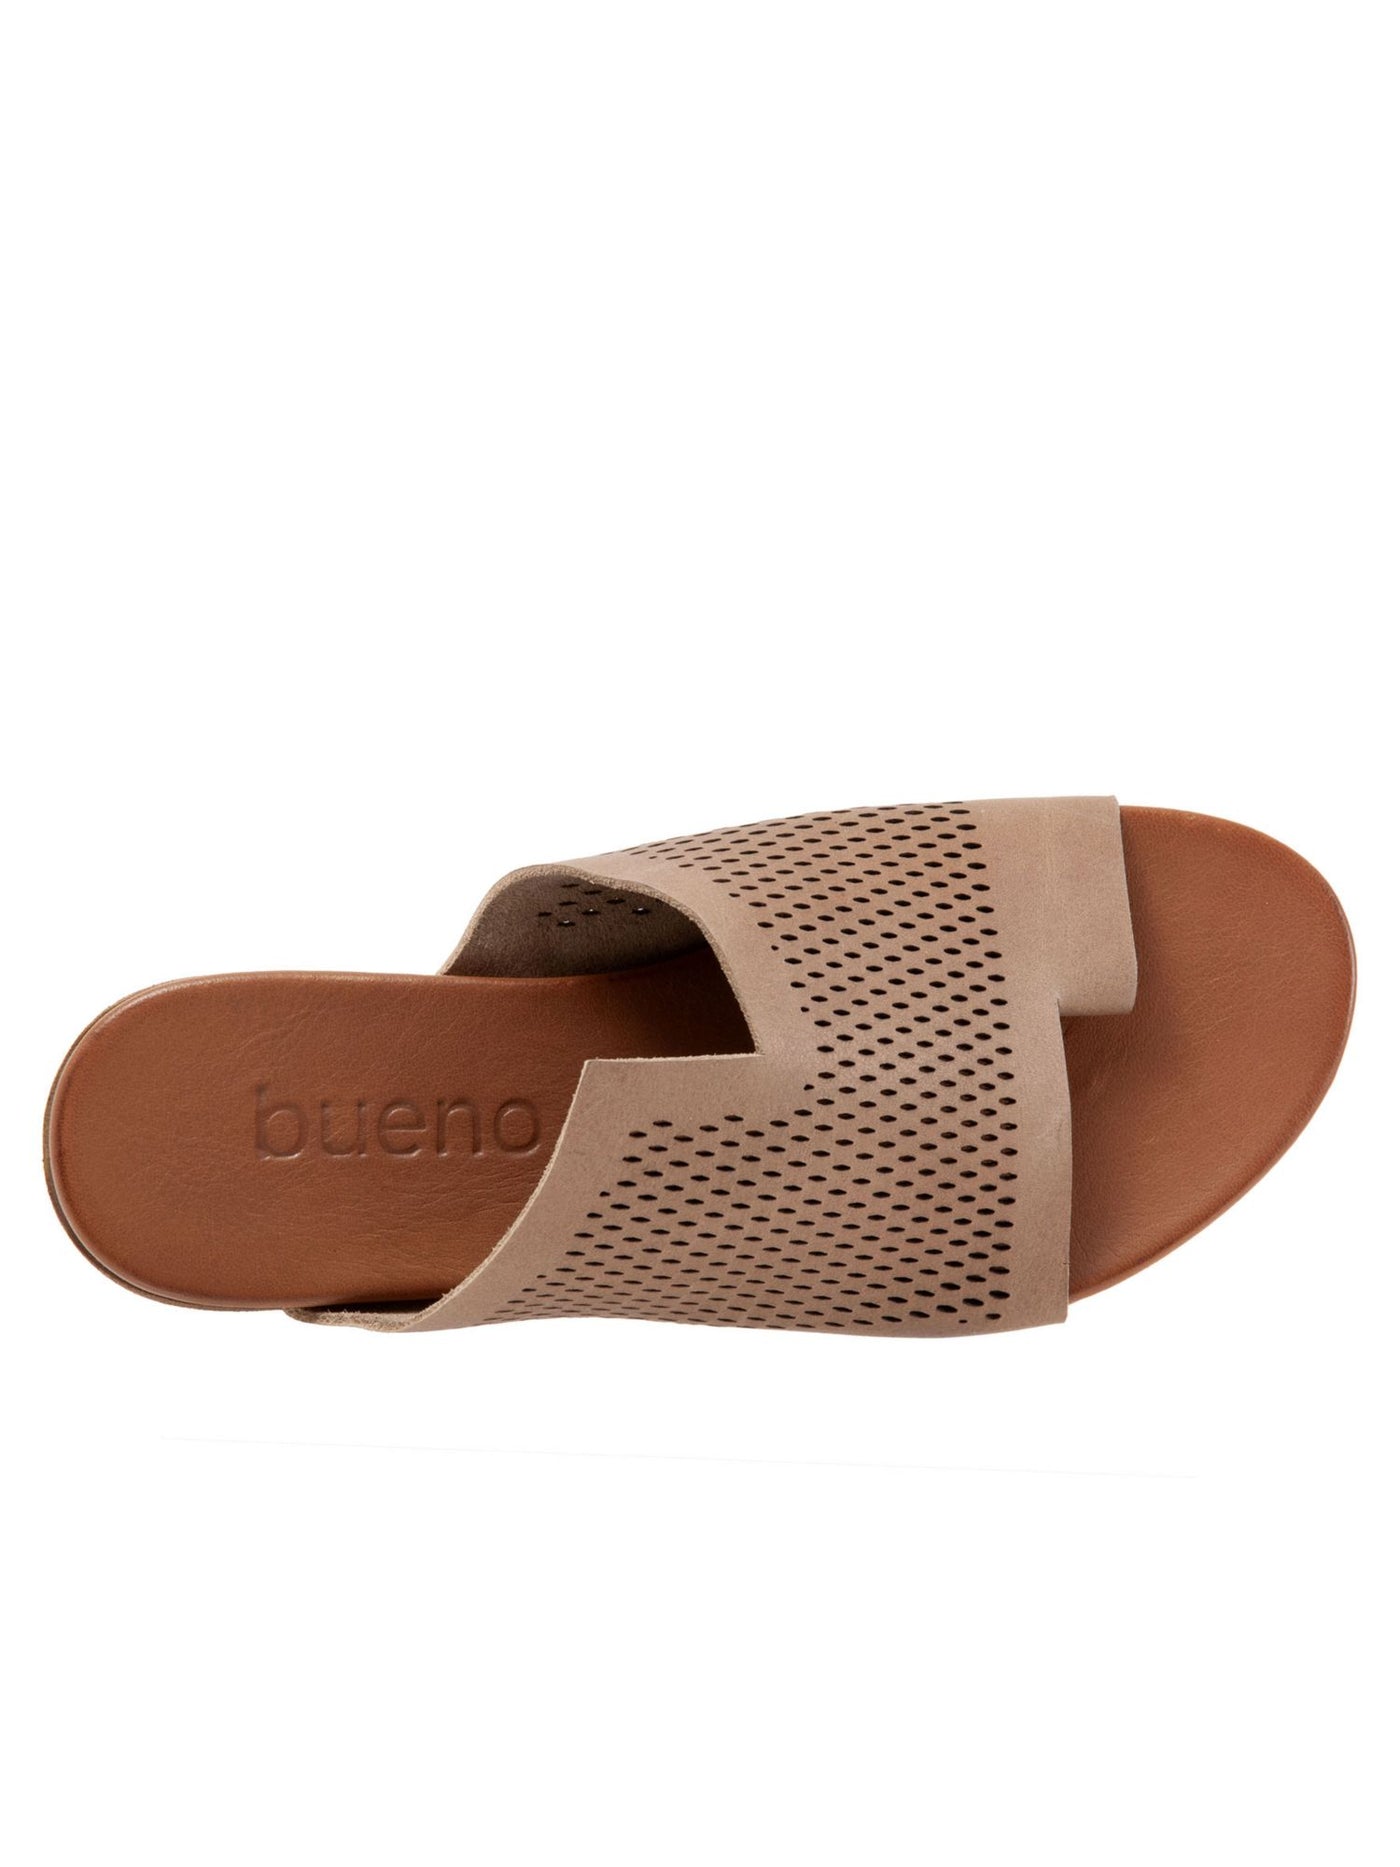 BUENO Womens Beige Perforated Tulla Round Toe Slip On Leather Sandals Shoes 38